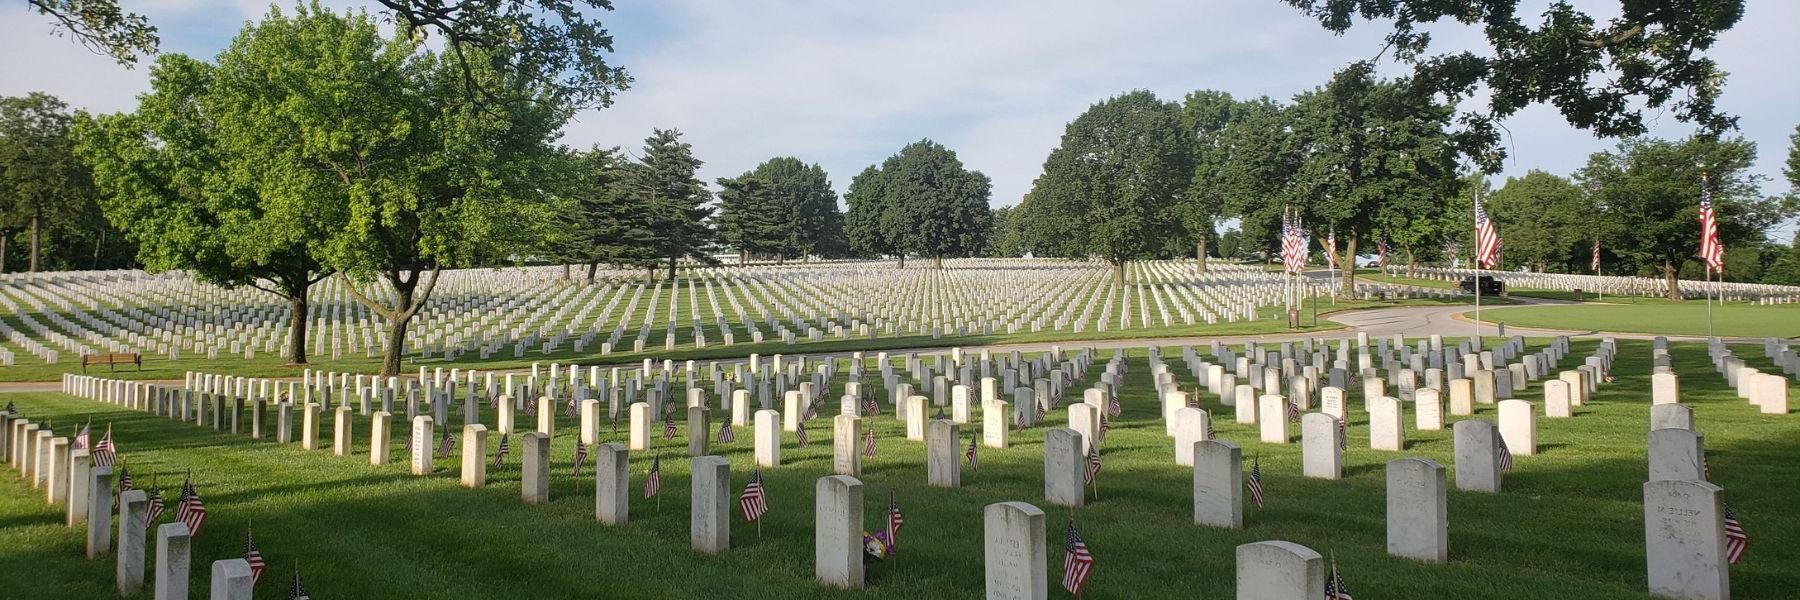 Jefferson Barracks National Cemetery preserves St. Louis’ fascinating role in U.S. military history.